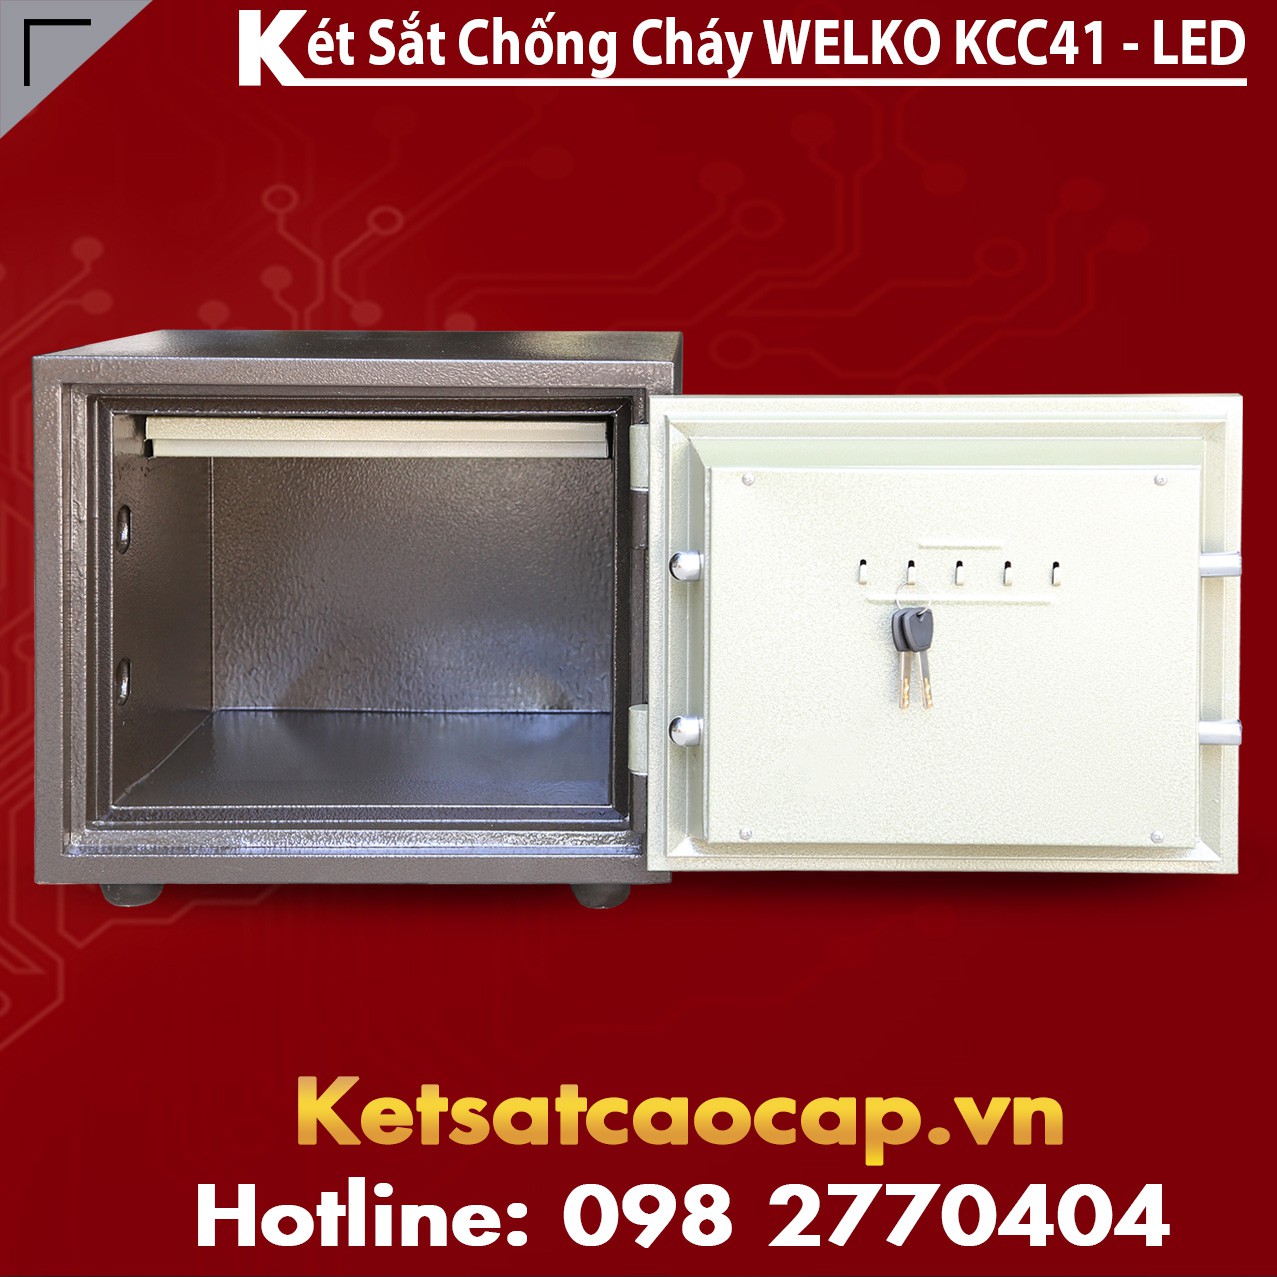 Security Safes Suppliers and Exporters Bao Gia Ket Sat Binh Duong Chinh Hang